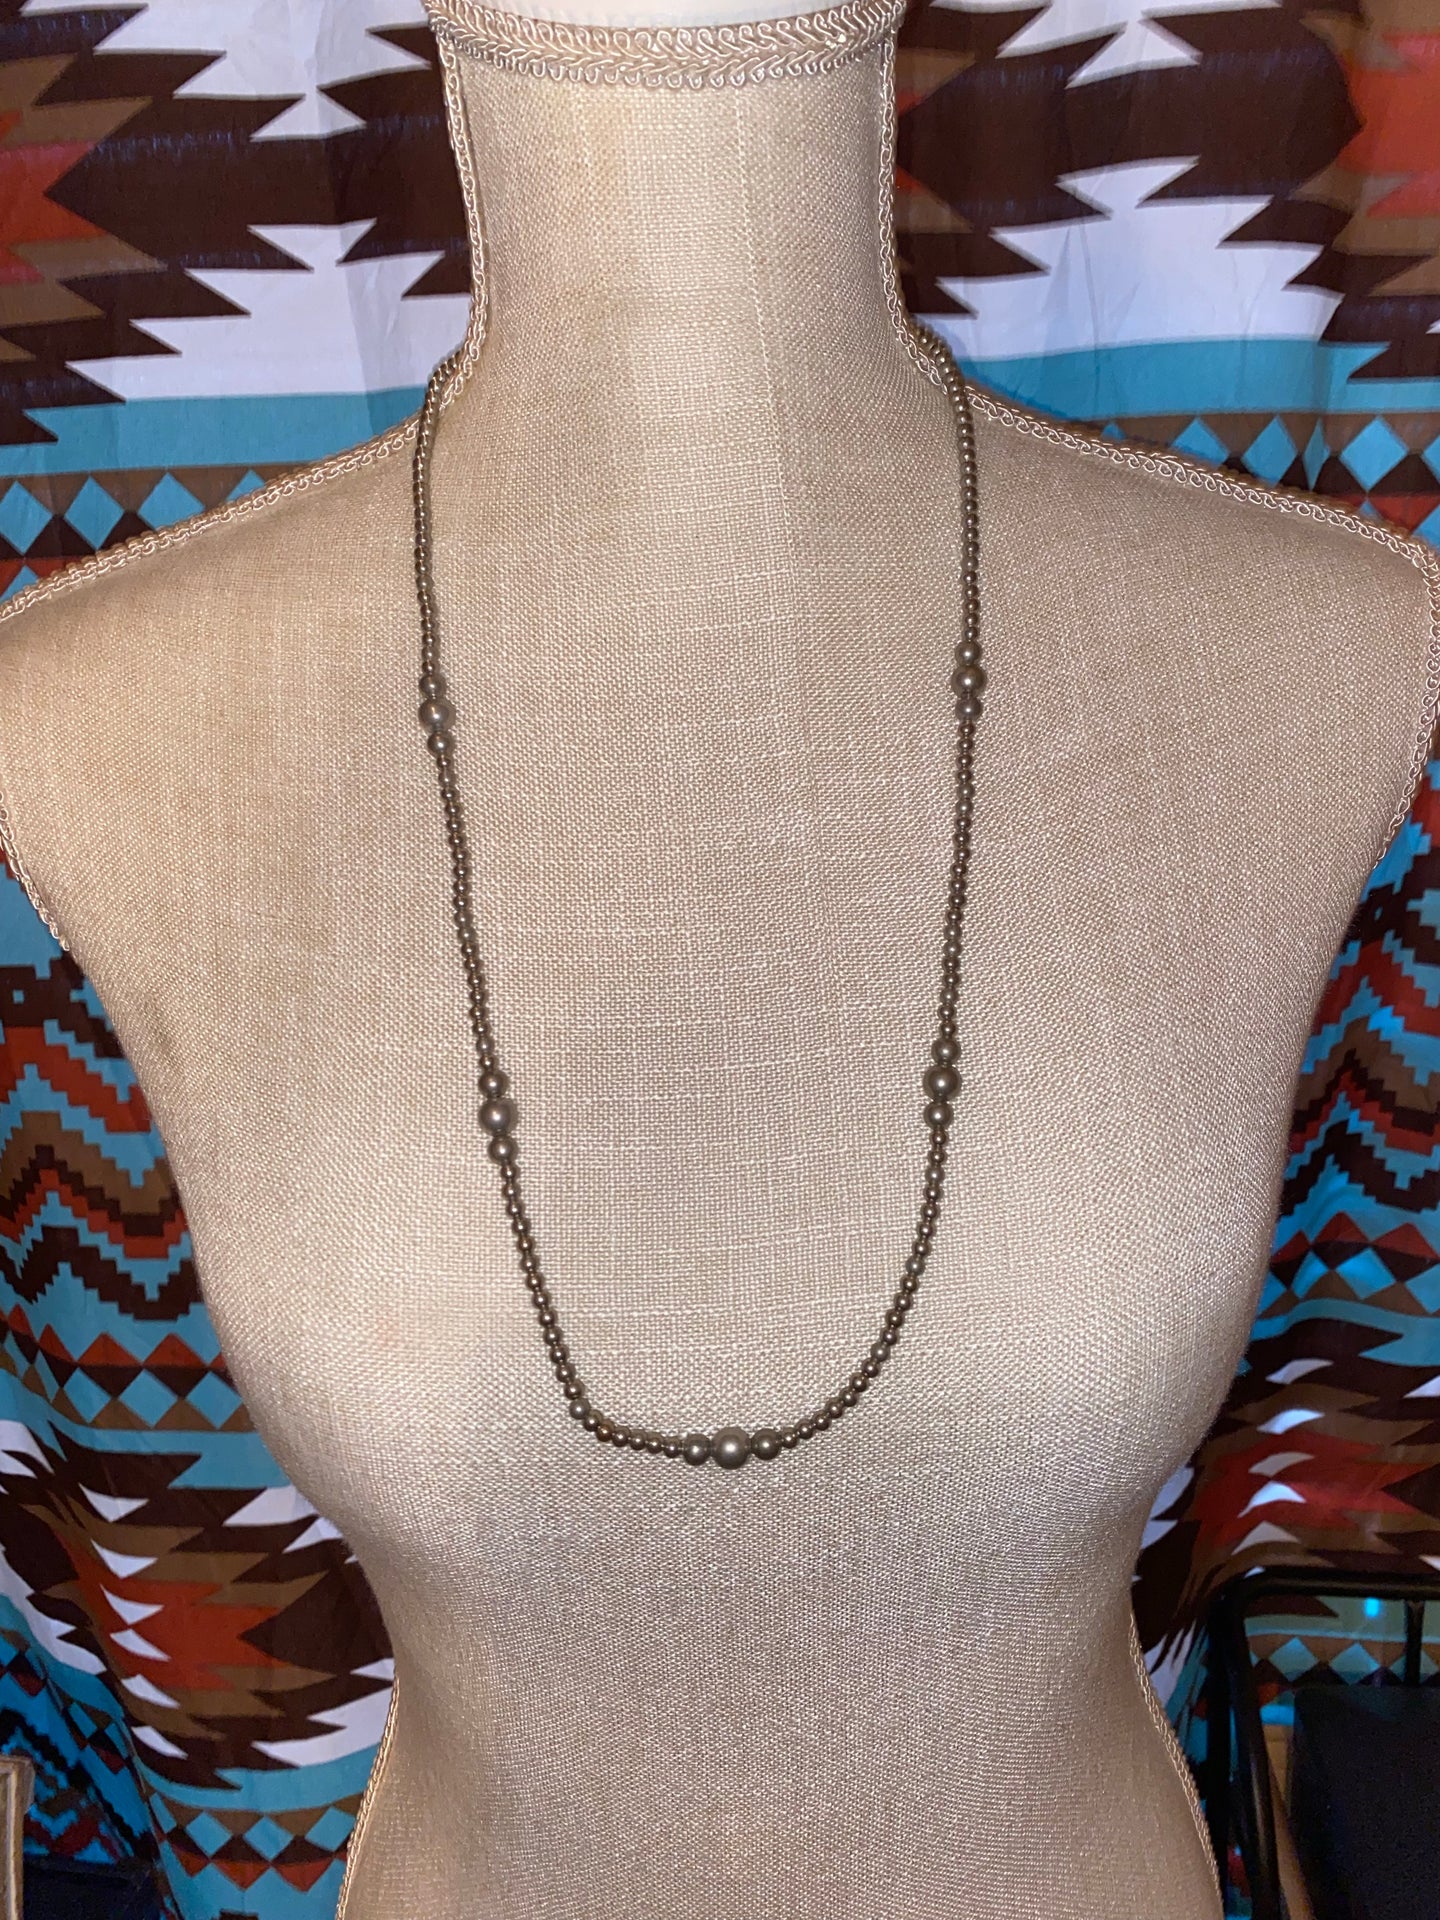 28” layering necklace